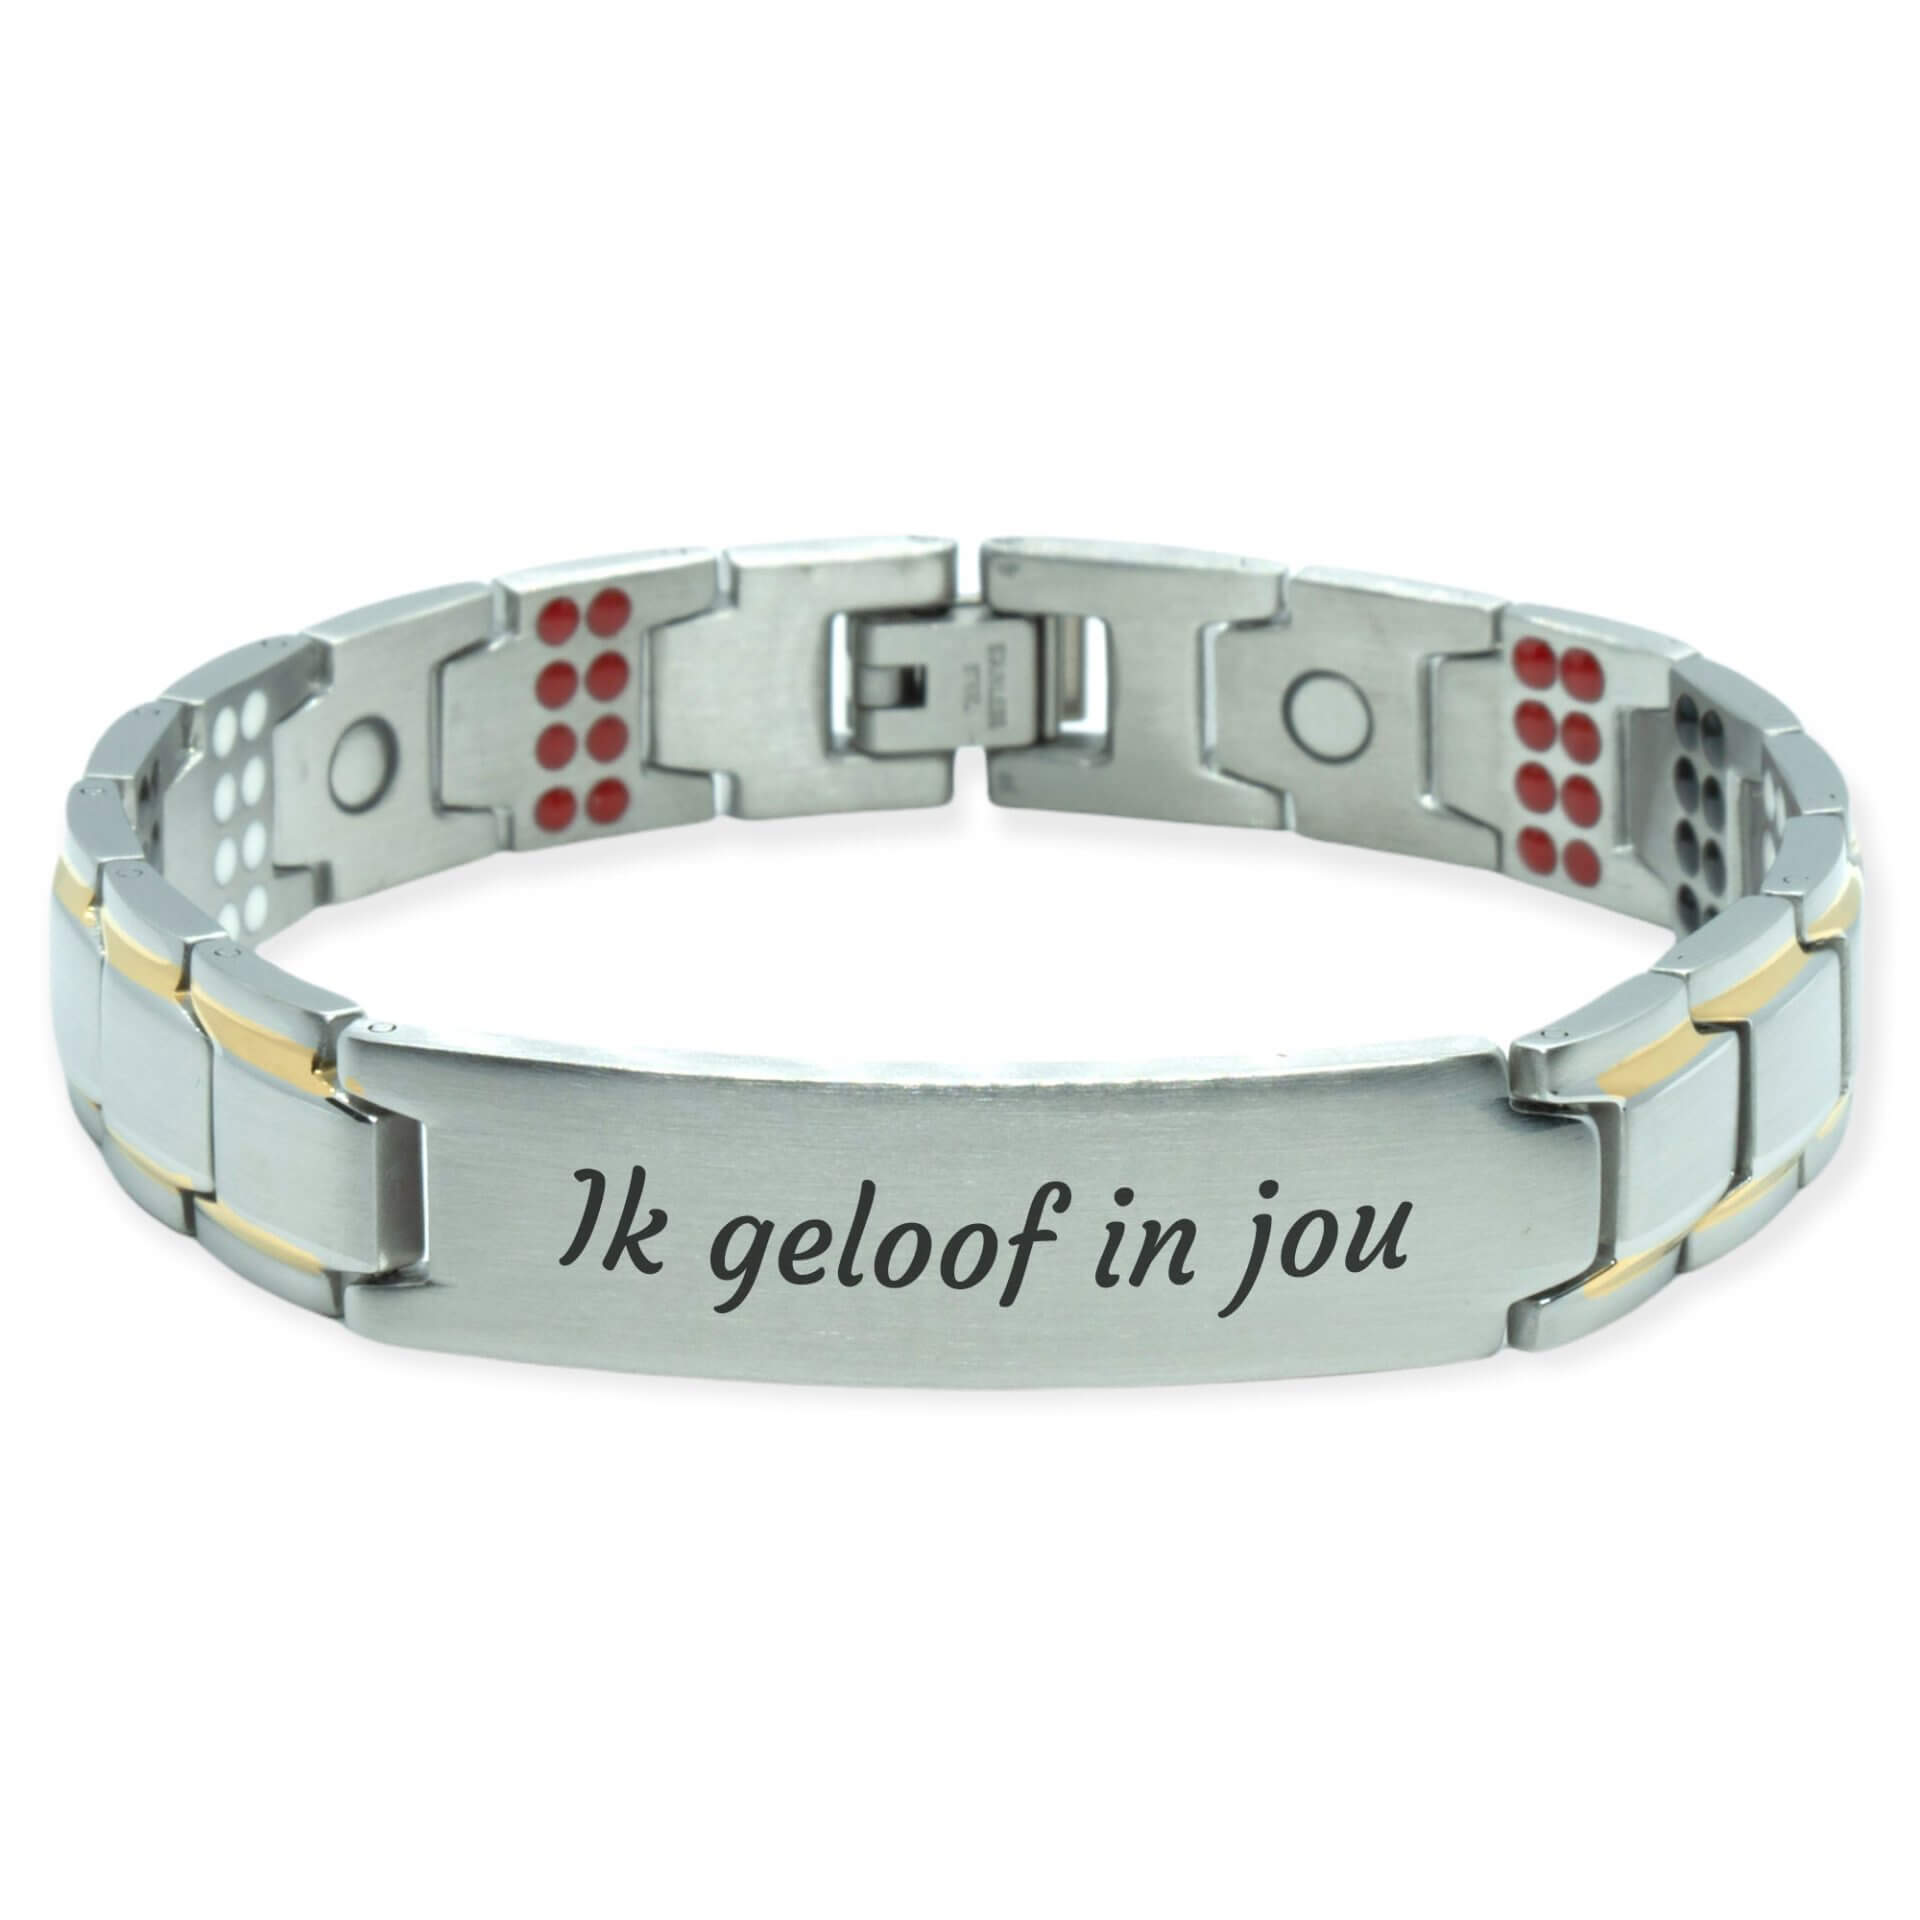 Magnet Bracelet - 8 Maxneet - With your own text